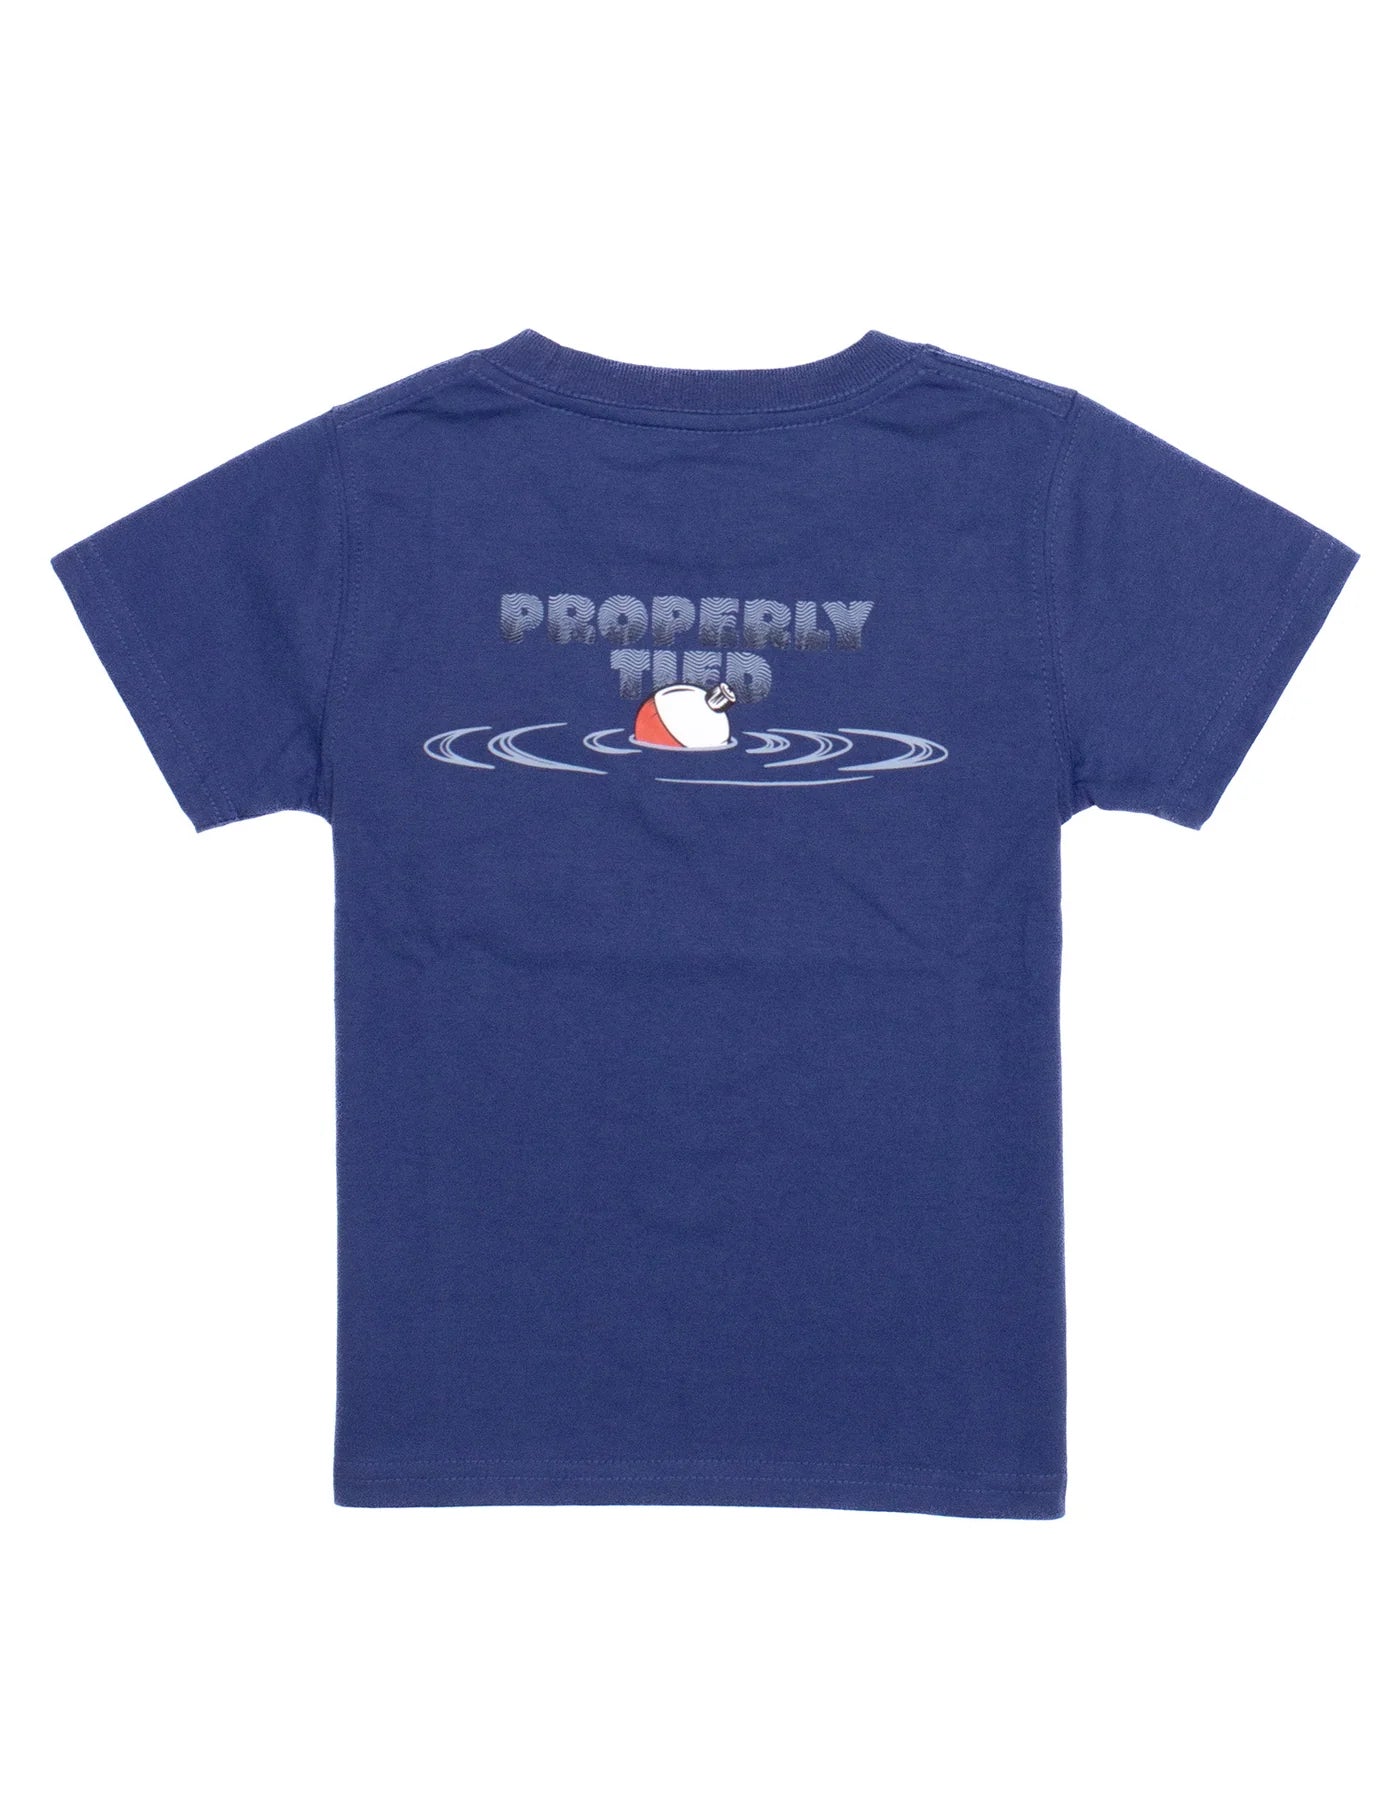 Properly Tied Baby Bobber SS Tee